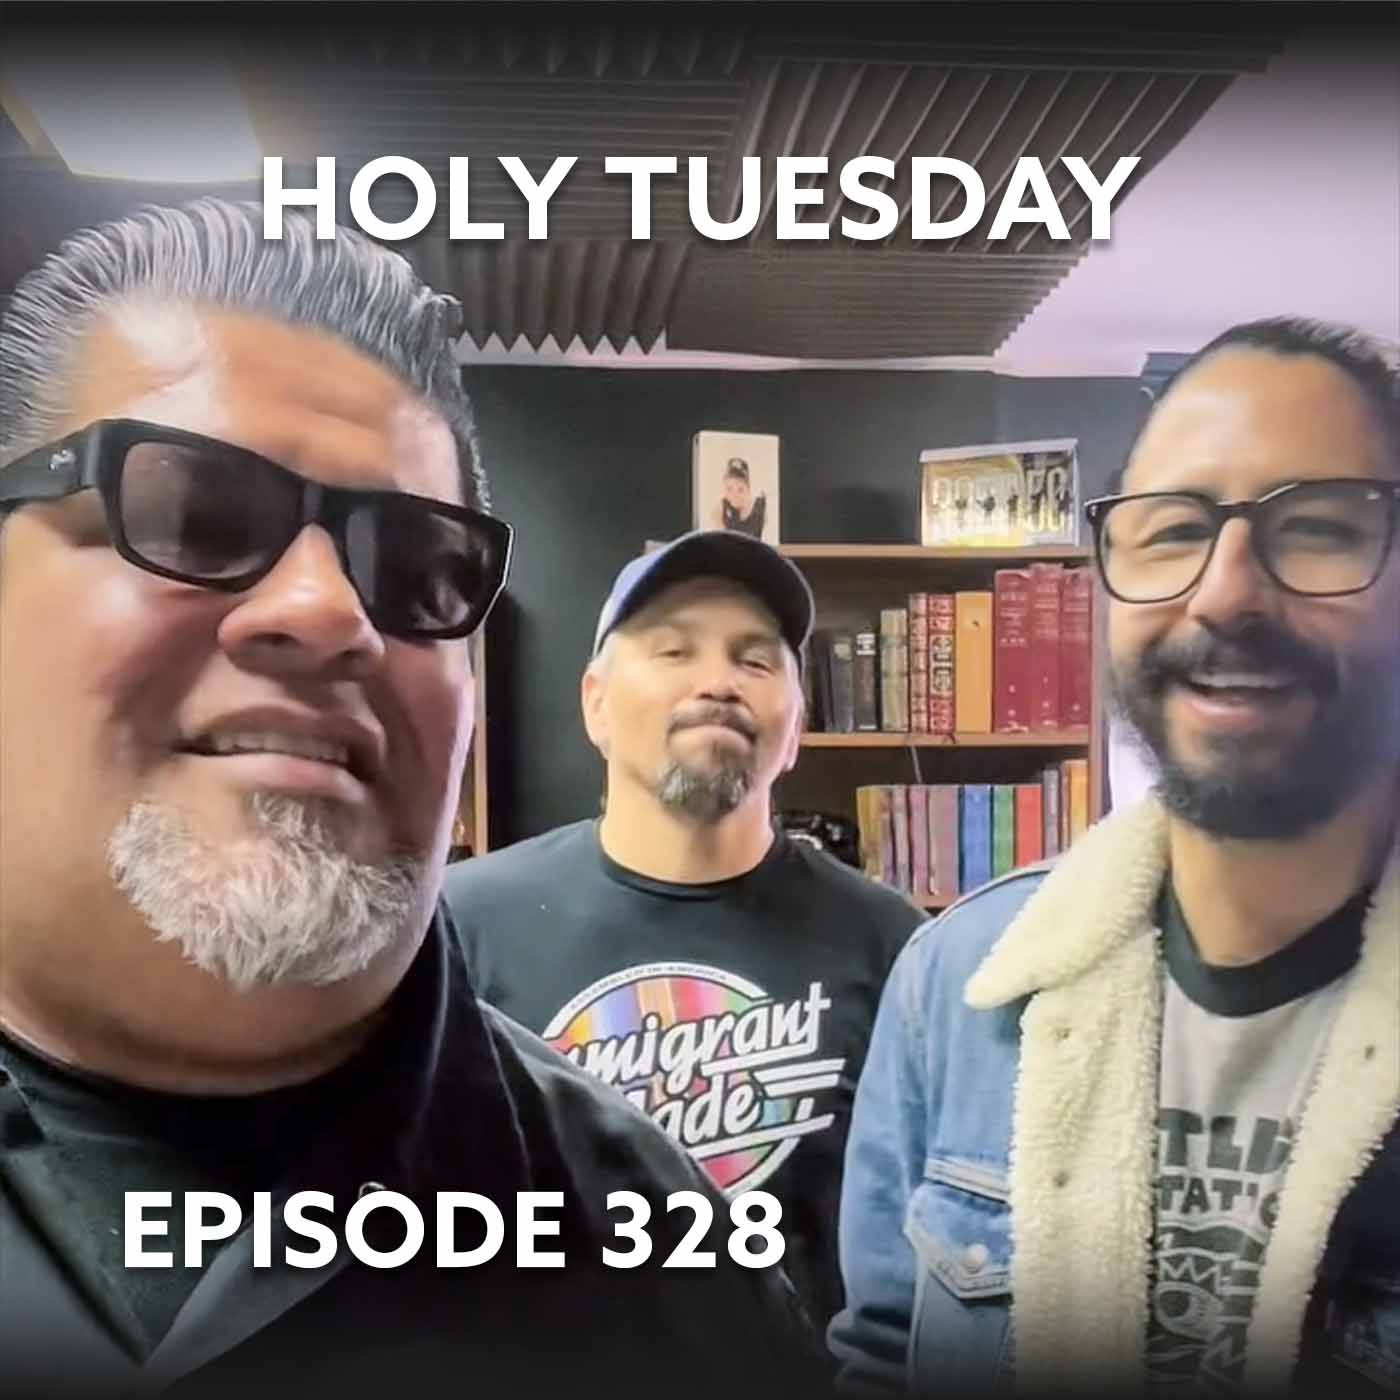 Episode 328 – Holy Tuesday